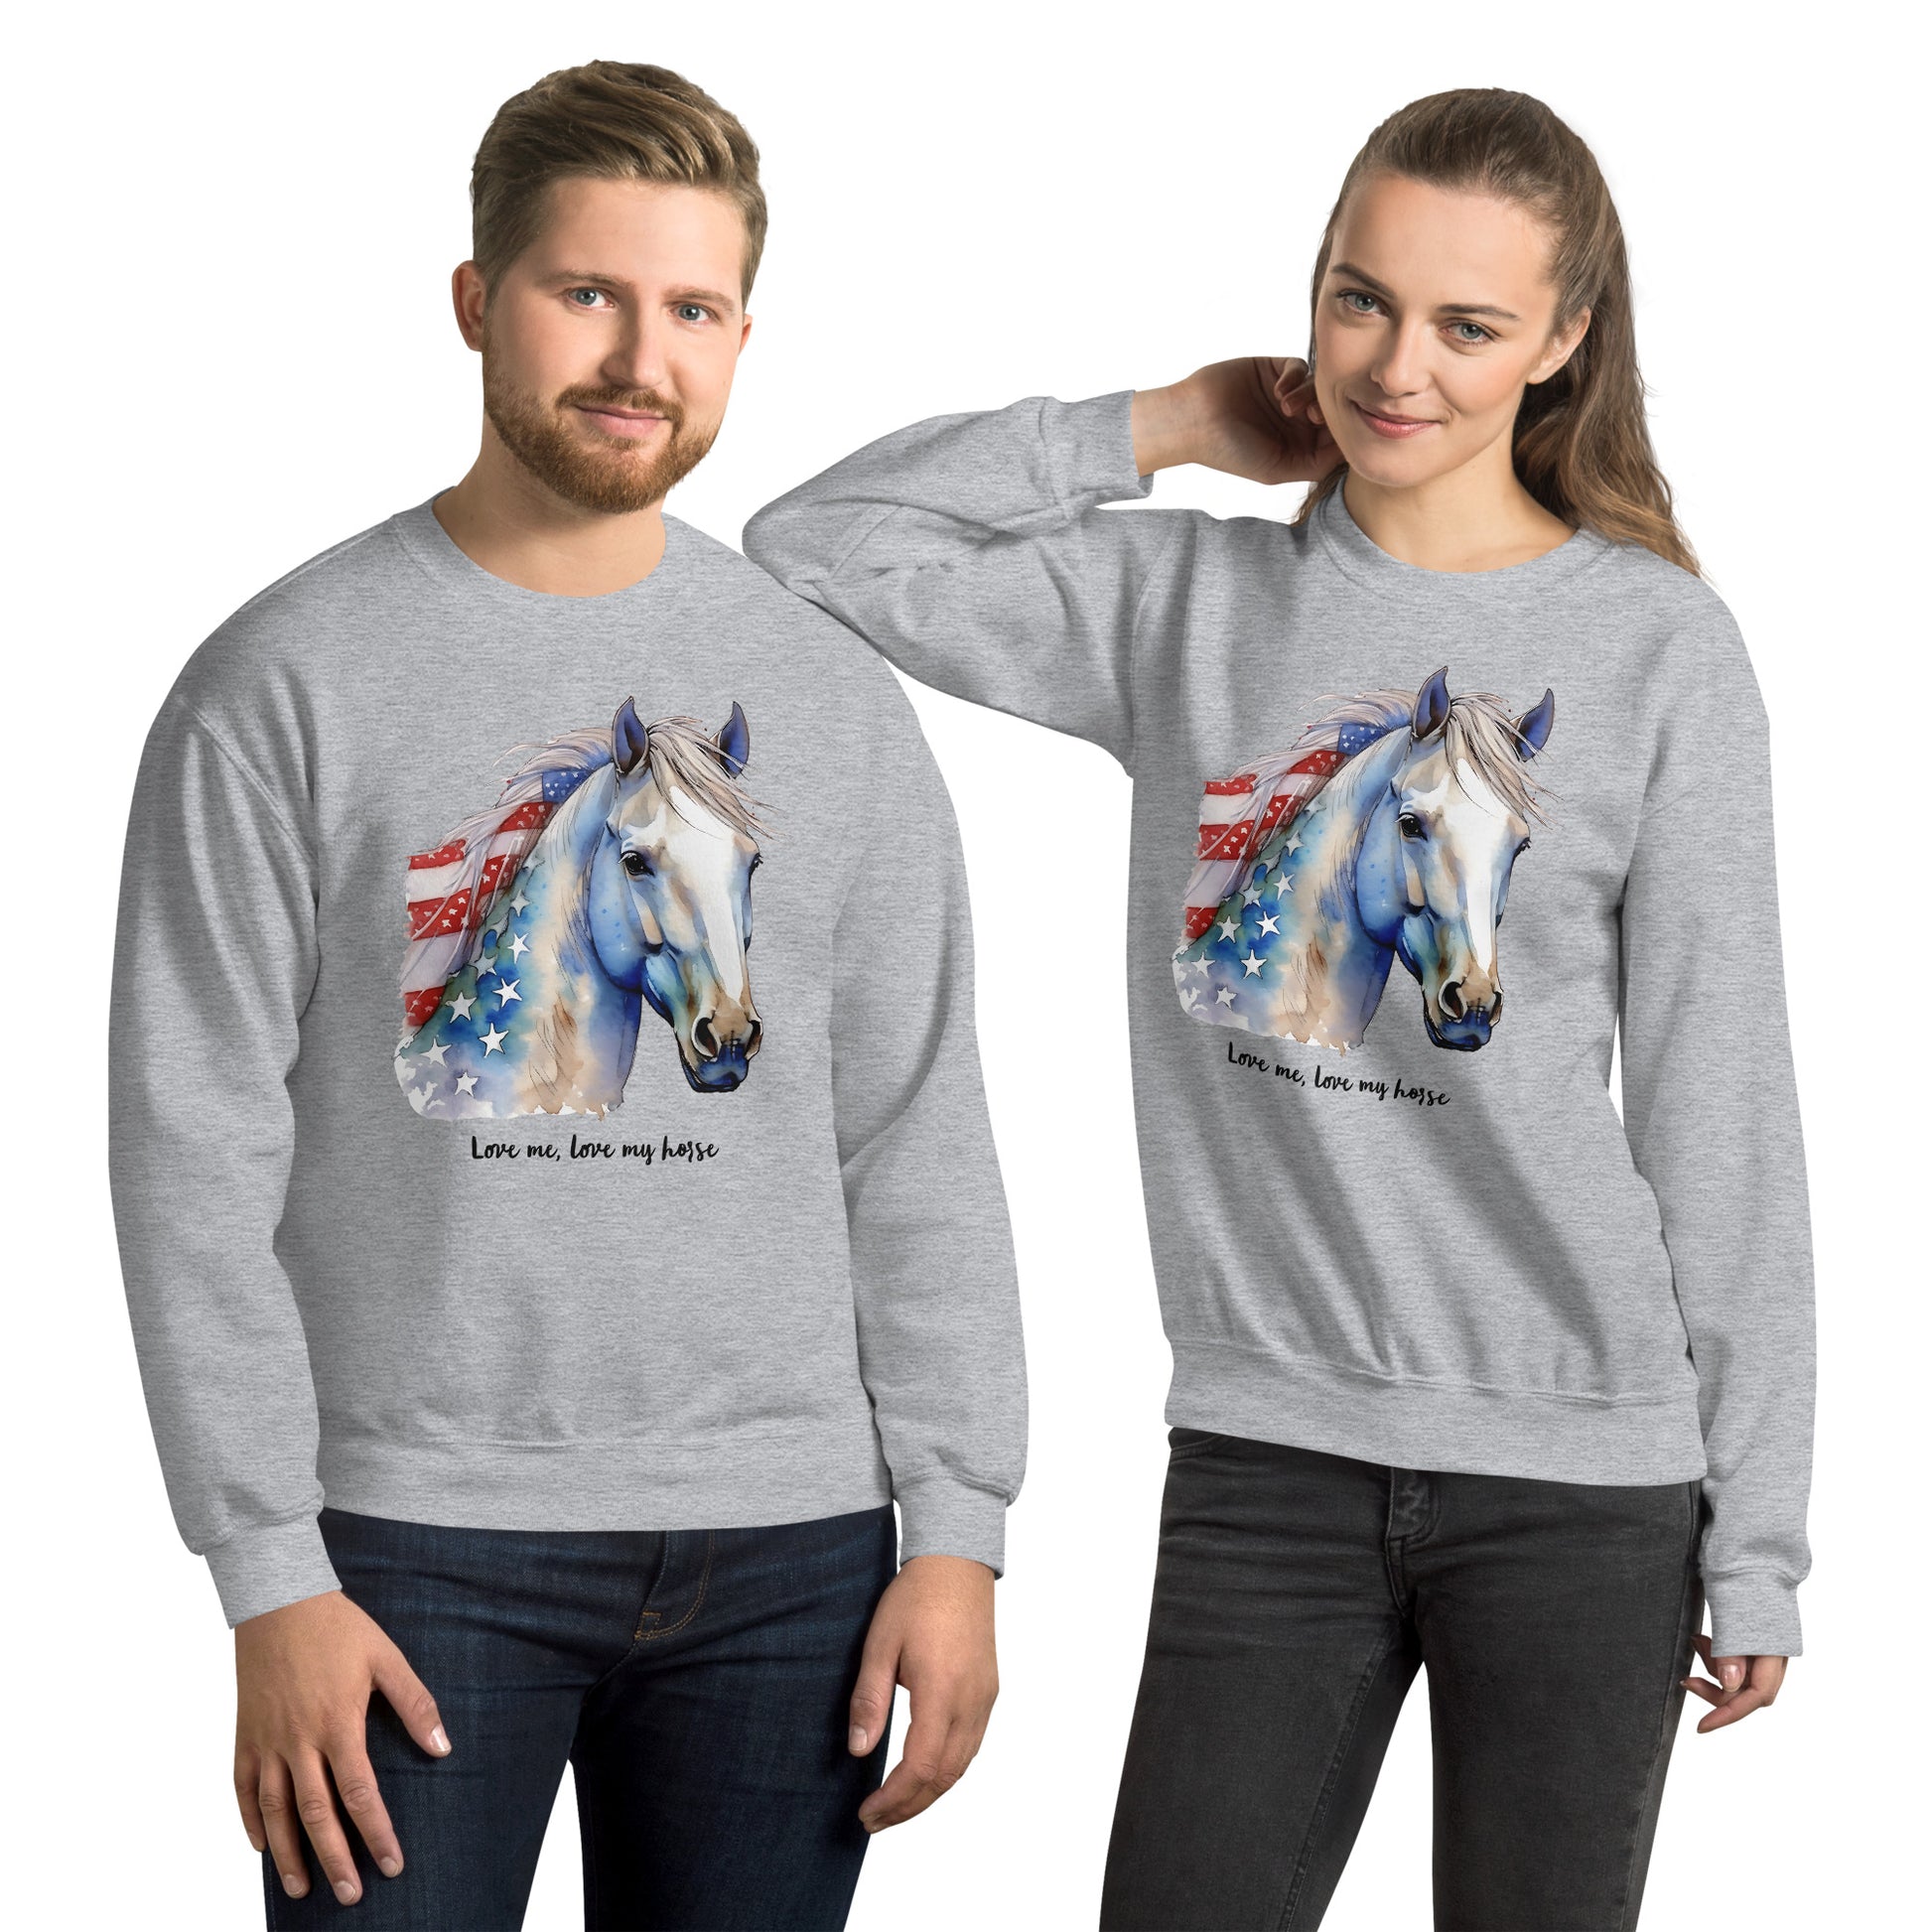 Grey USA Colored Patriotic Sweatshirt With Blue Horse Graphic Design For Horse Lovers